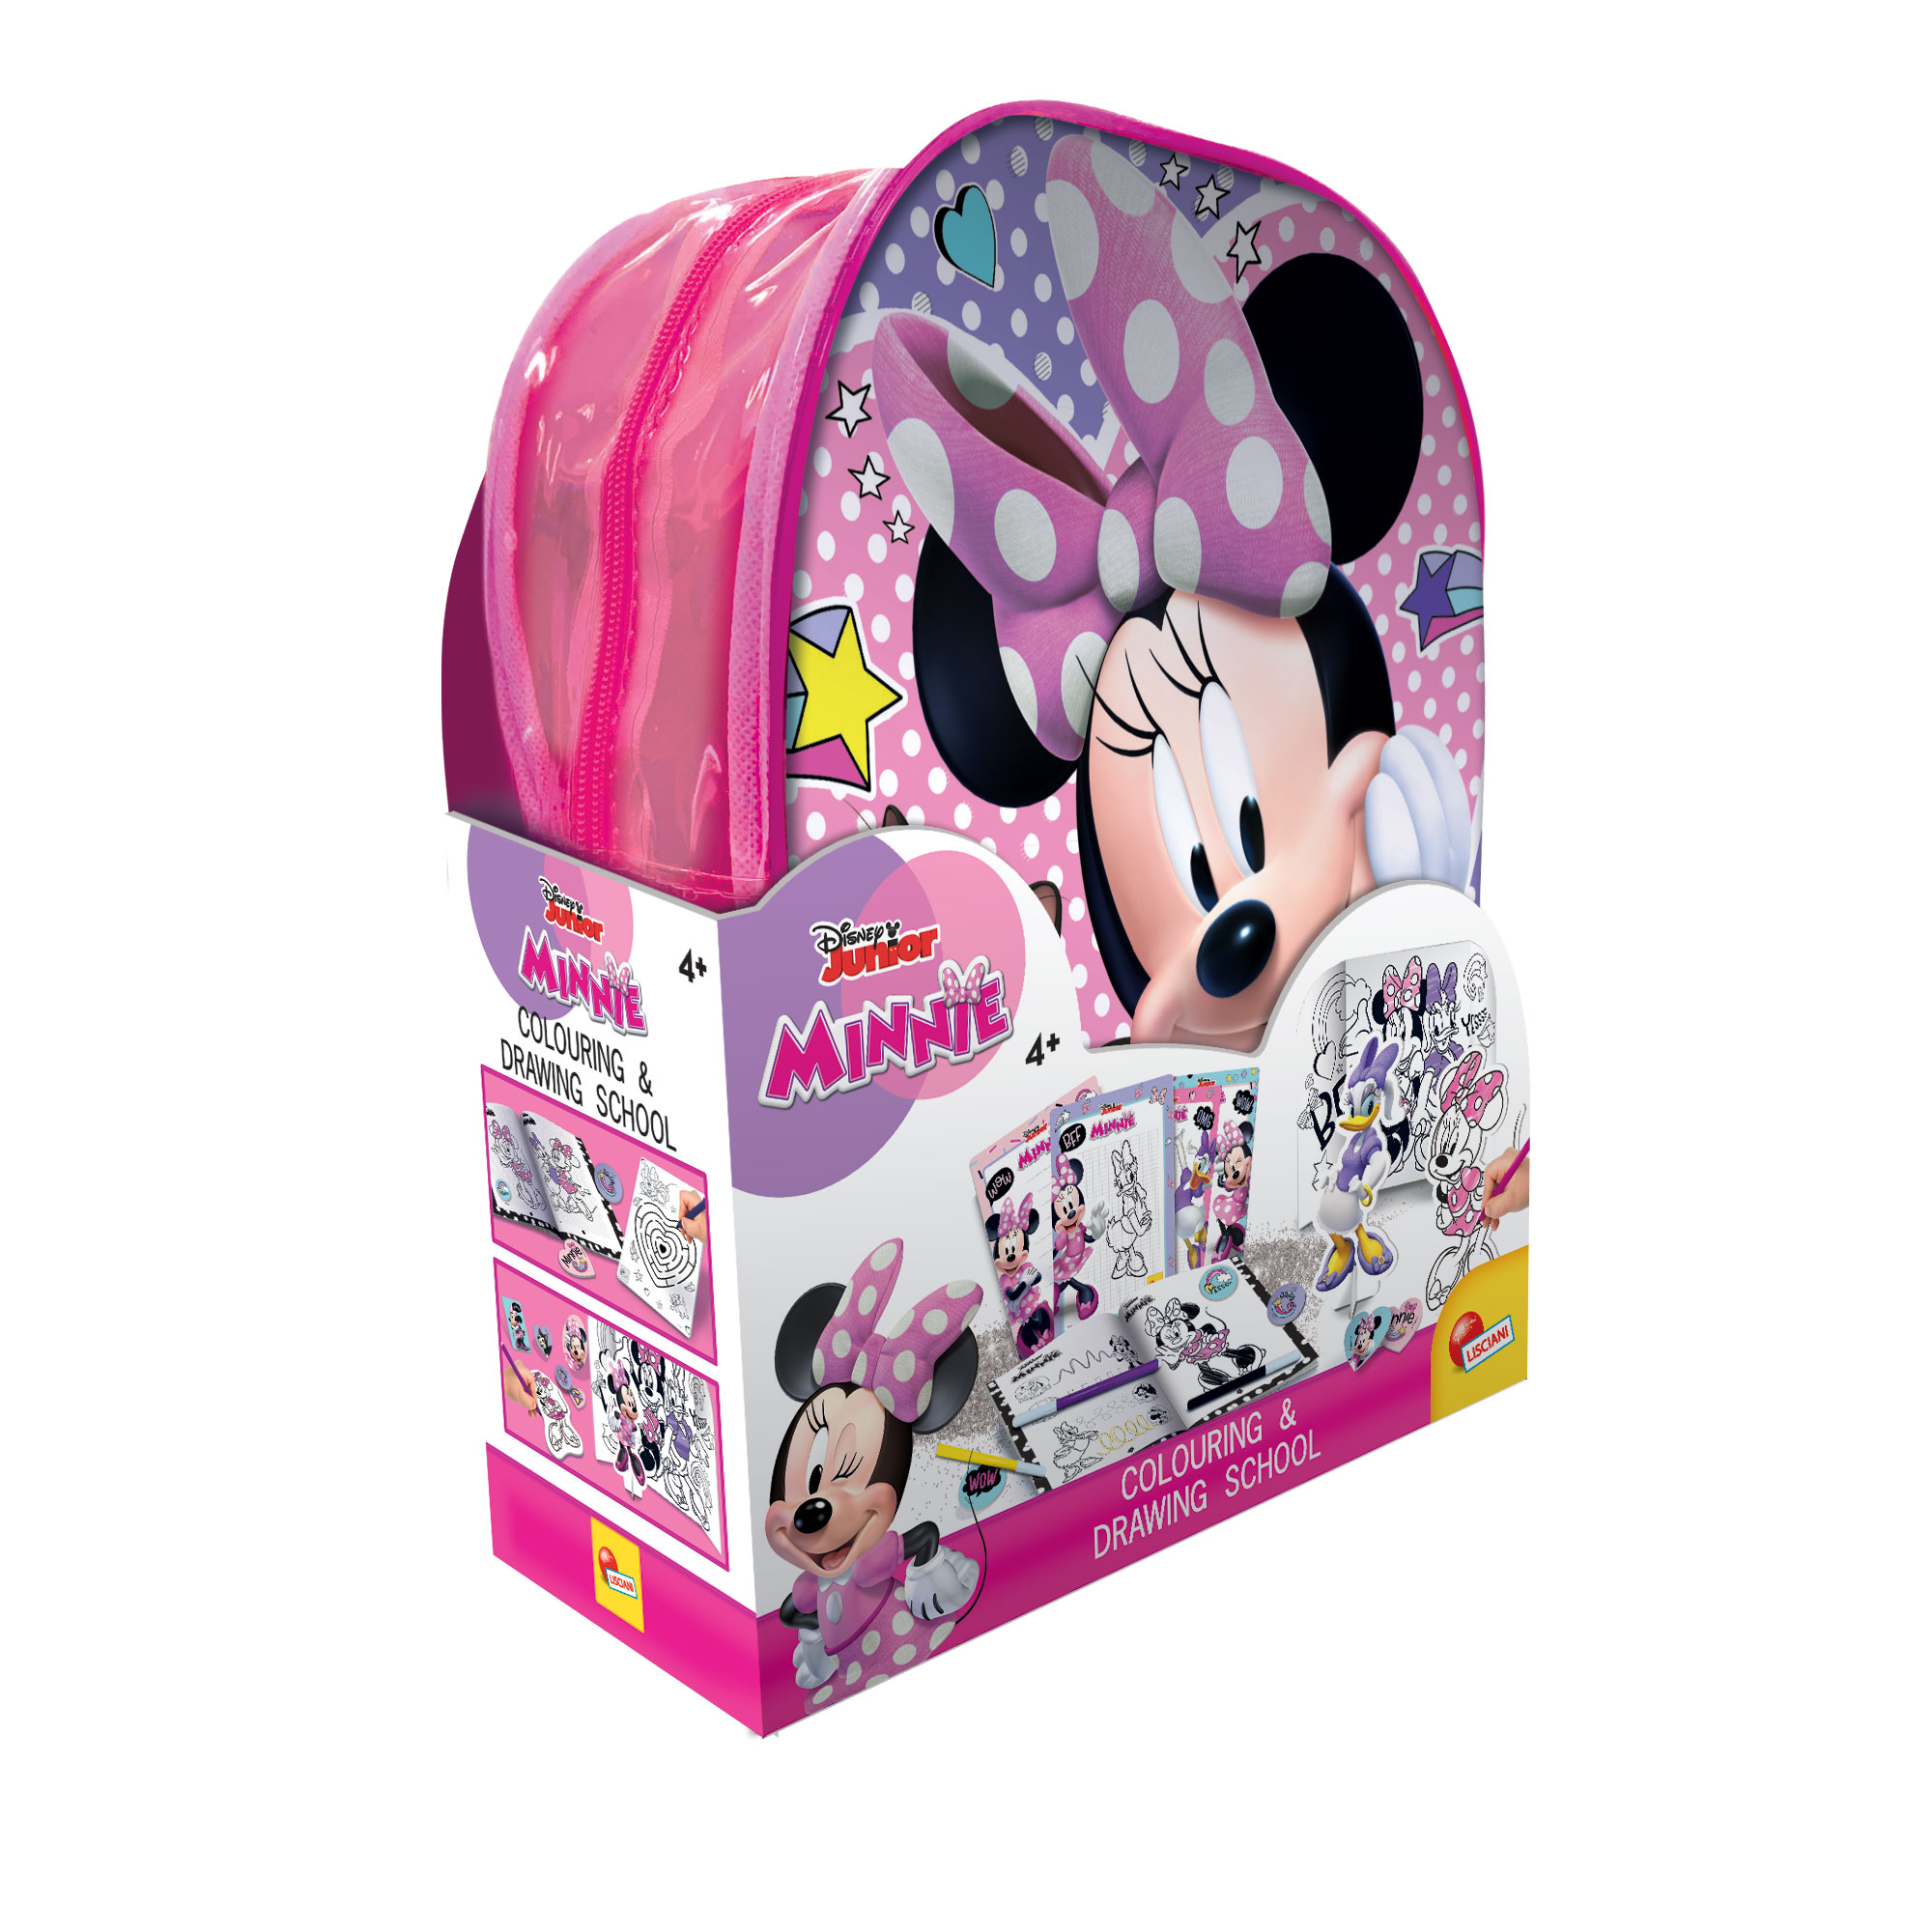 Photo 1 du jeu MINNIE ZAINETTO COLOURING AND DRAWING SCHOOL